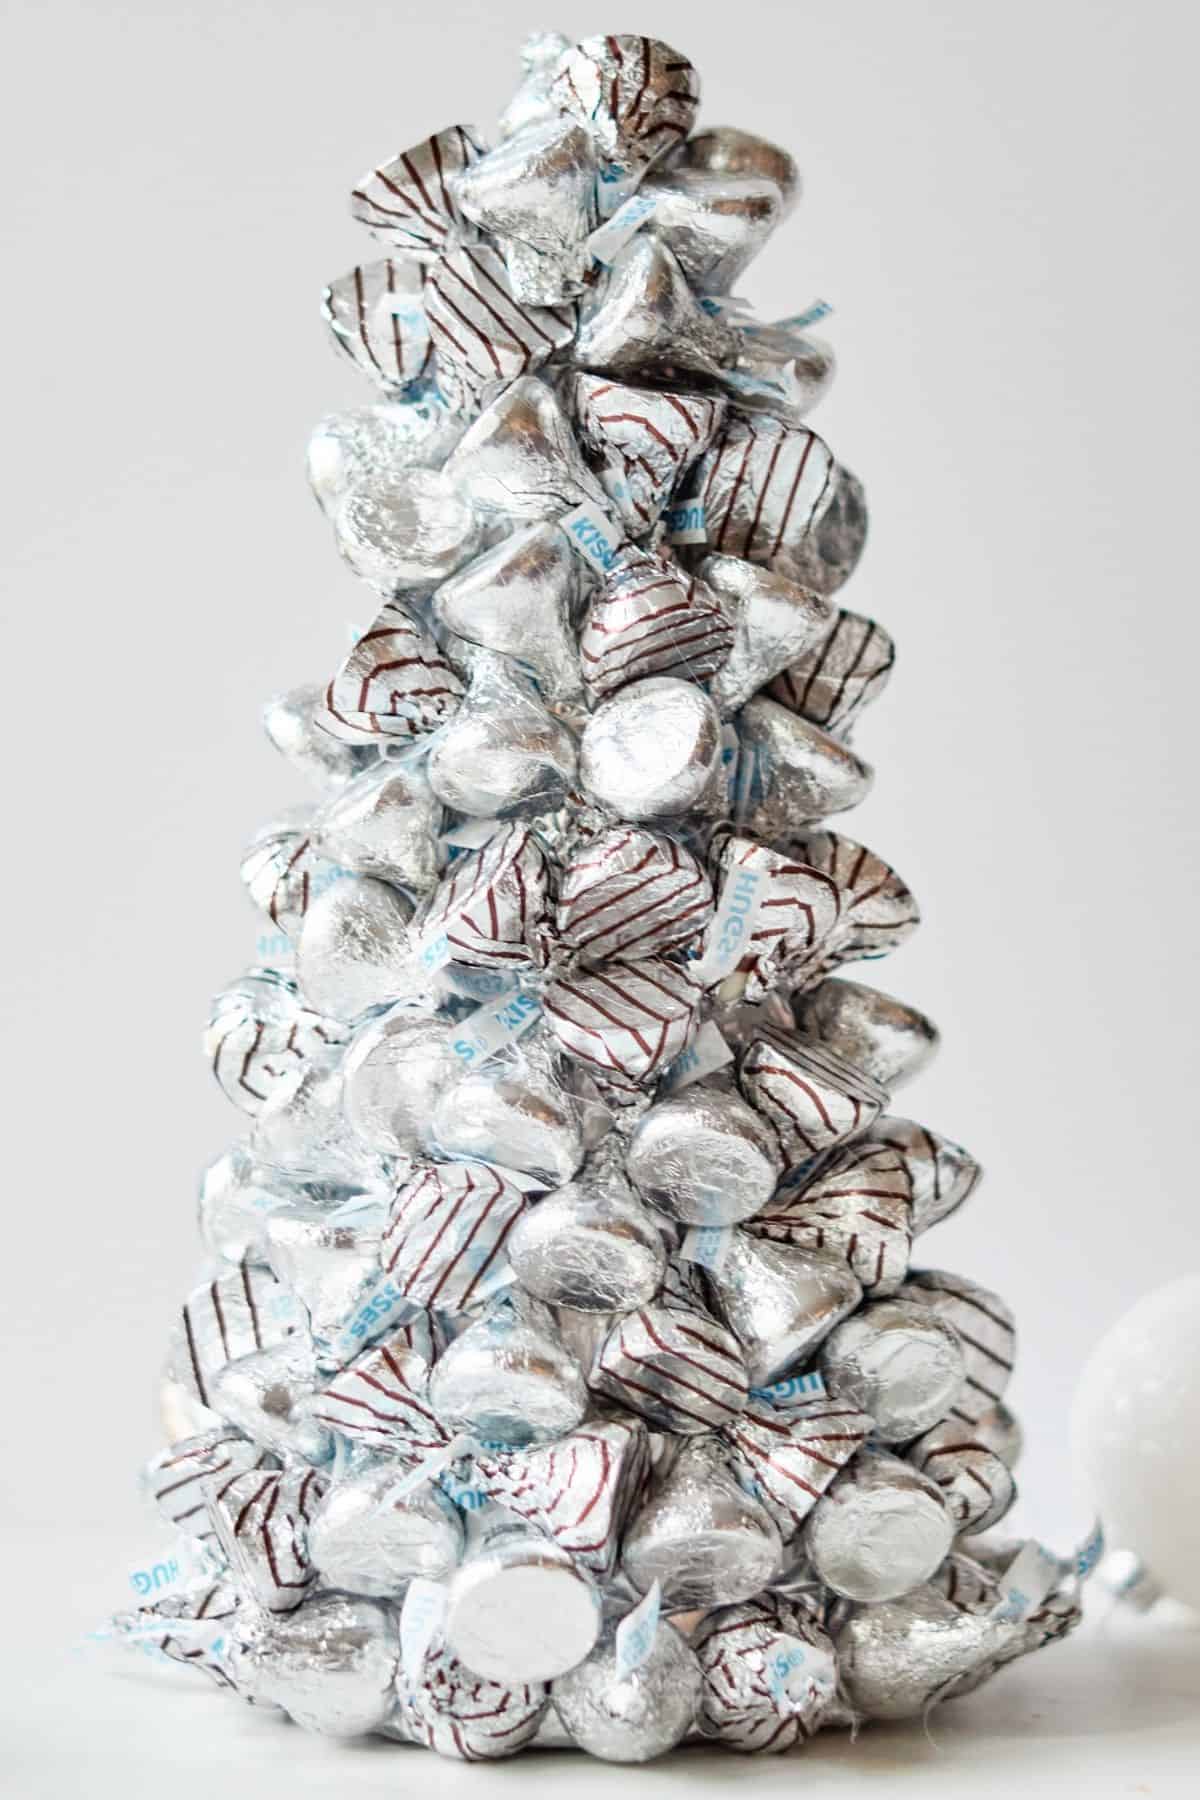 Hershey Christmas tree made of Hershey kisses and Hershey's Hugs candy on a grey background with a white holiday ornament in the background